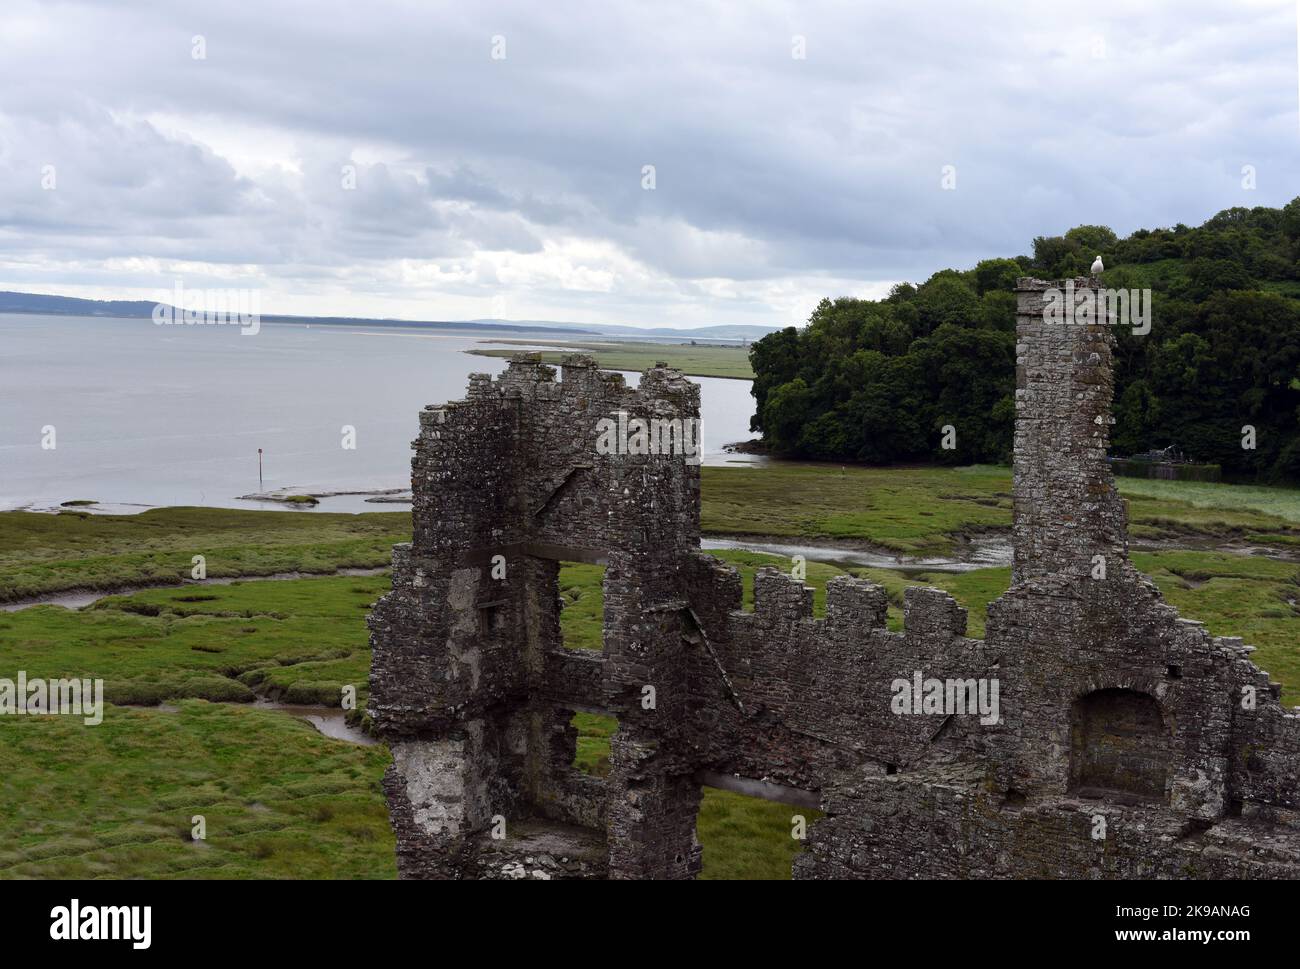 A walk around Laugharne Castle in Carmarthenshire, taking various shots of interest. Number 4034 Stock Photo